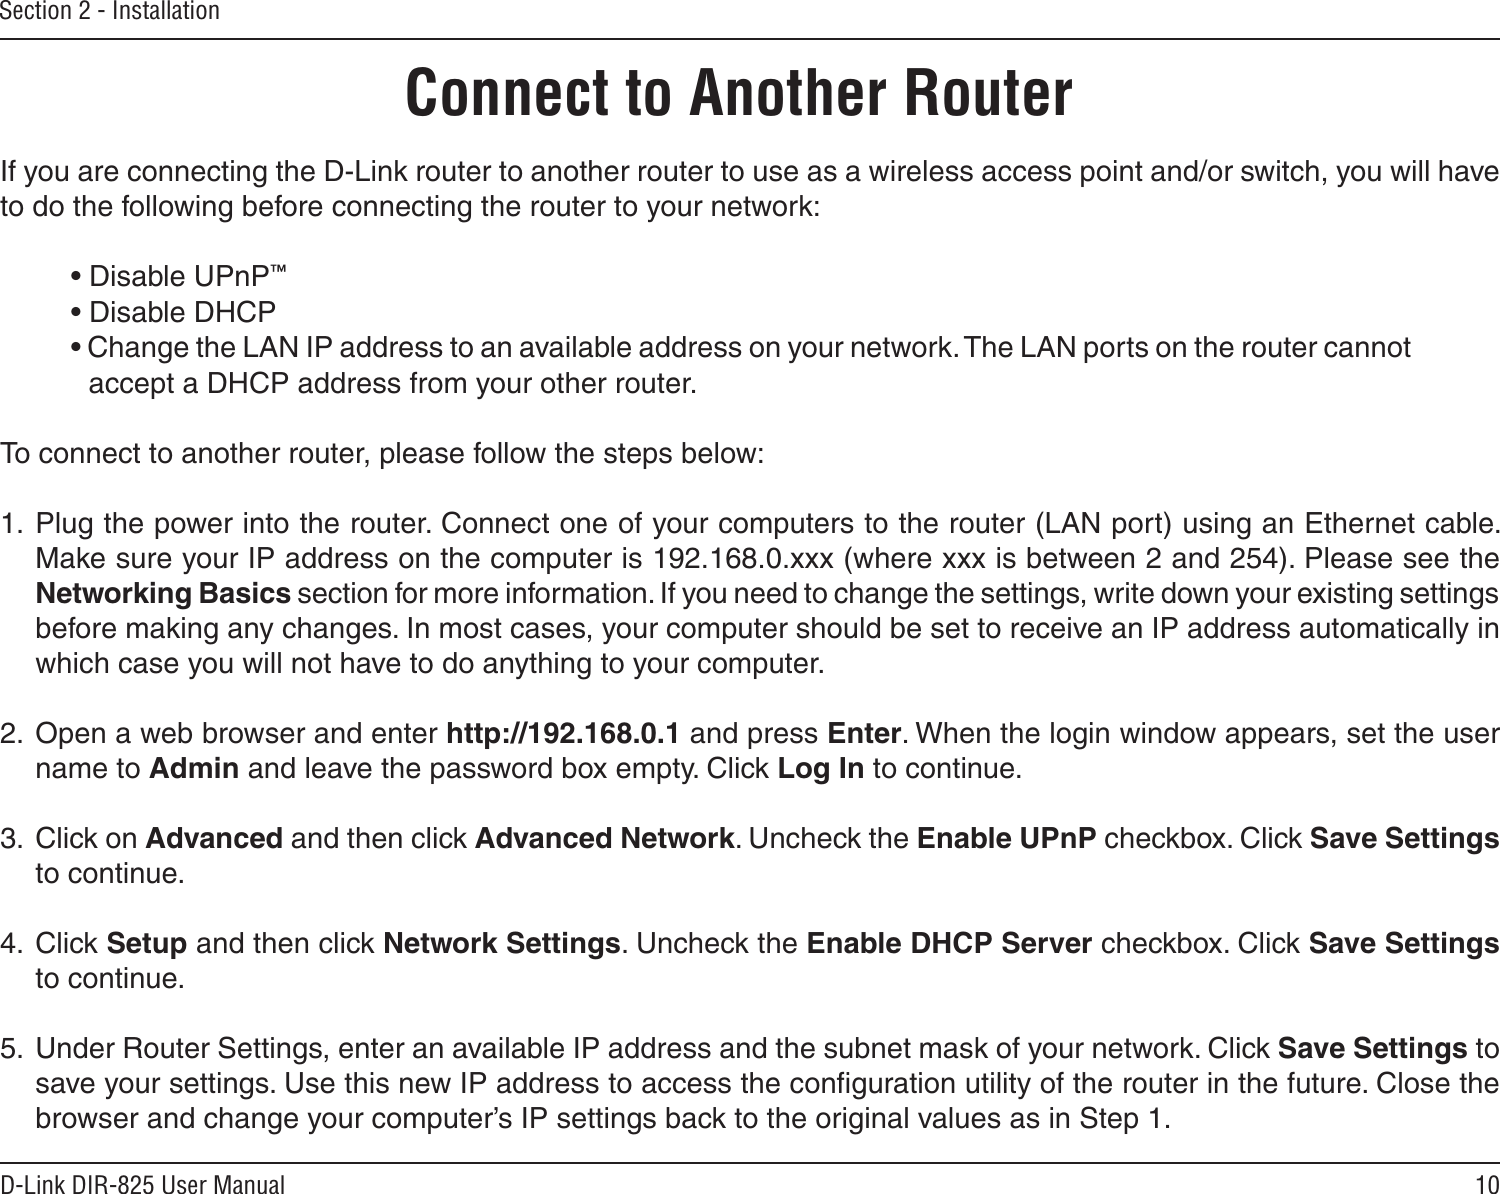 10D-Link DIR-825 User ManualSection 2 - InstallationIf you are connecting the D-Link router to another router to use as a wireless access point and/or switch, you will have to do the following before connecting the router to your network:• Disable UPnP™• Disable DHCP• Change the LAN IP address to an available address on your network. The LAN ports on the router cannot accept a DHCP address from your other router.To connect to another router, please follow the steps below:1.  Plug the power into the router. Connect one of your computers to the router (LAN port) using an Ethernet cable. Make sure your IP address on the computer is 192.168.0.xxx (where xxx is between 2 and 254). Please see the Networking Basics section for more information. If you need to change the settings, write down your existing settings before making any changes. In most cases, your computer should be set to receive an IP address automatically in which case you will not have to do anything to your computer.2.  Open a web browser and enter http://192.168.0.1 and press Enter. When the login window appears, set the user name to Admin and leave the password box empty. Click Log In to continue.3.  Click on Advanced and then click Advanced Network. Uncheck the Enable UPnP checkbox. Click Save Settings to continue. 4.  Click Setup and then click Network Settings. Uncheck the Enable DHCP Server checkbox. Click Save Settings to continue.5.  Under Router Settings, enter an available IP address and the subnet mask of your network. Click Save Settings to save your settings. Use this new IP address to access the conﬁguration utility of the router in the future. Close the browser and change your computer’s IP settings back to the original values as in Step 1.Connect to Another Router